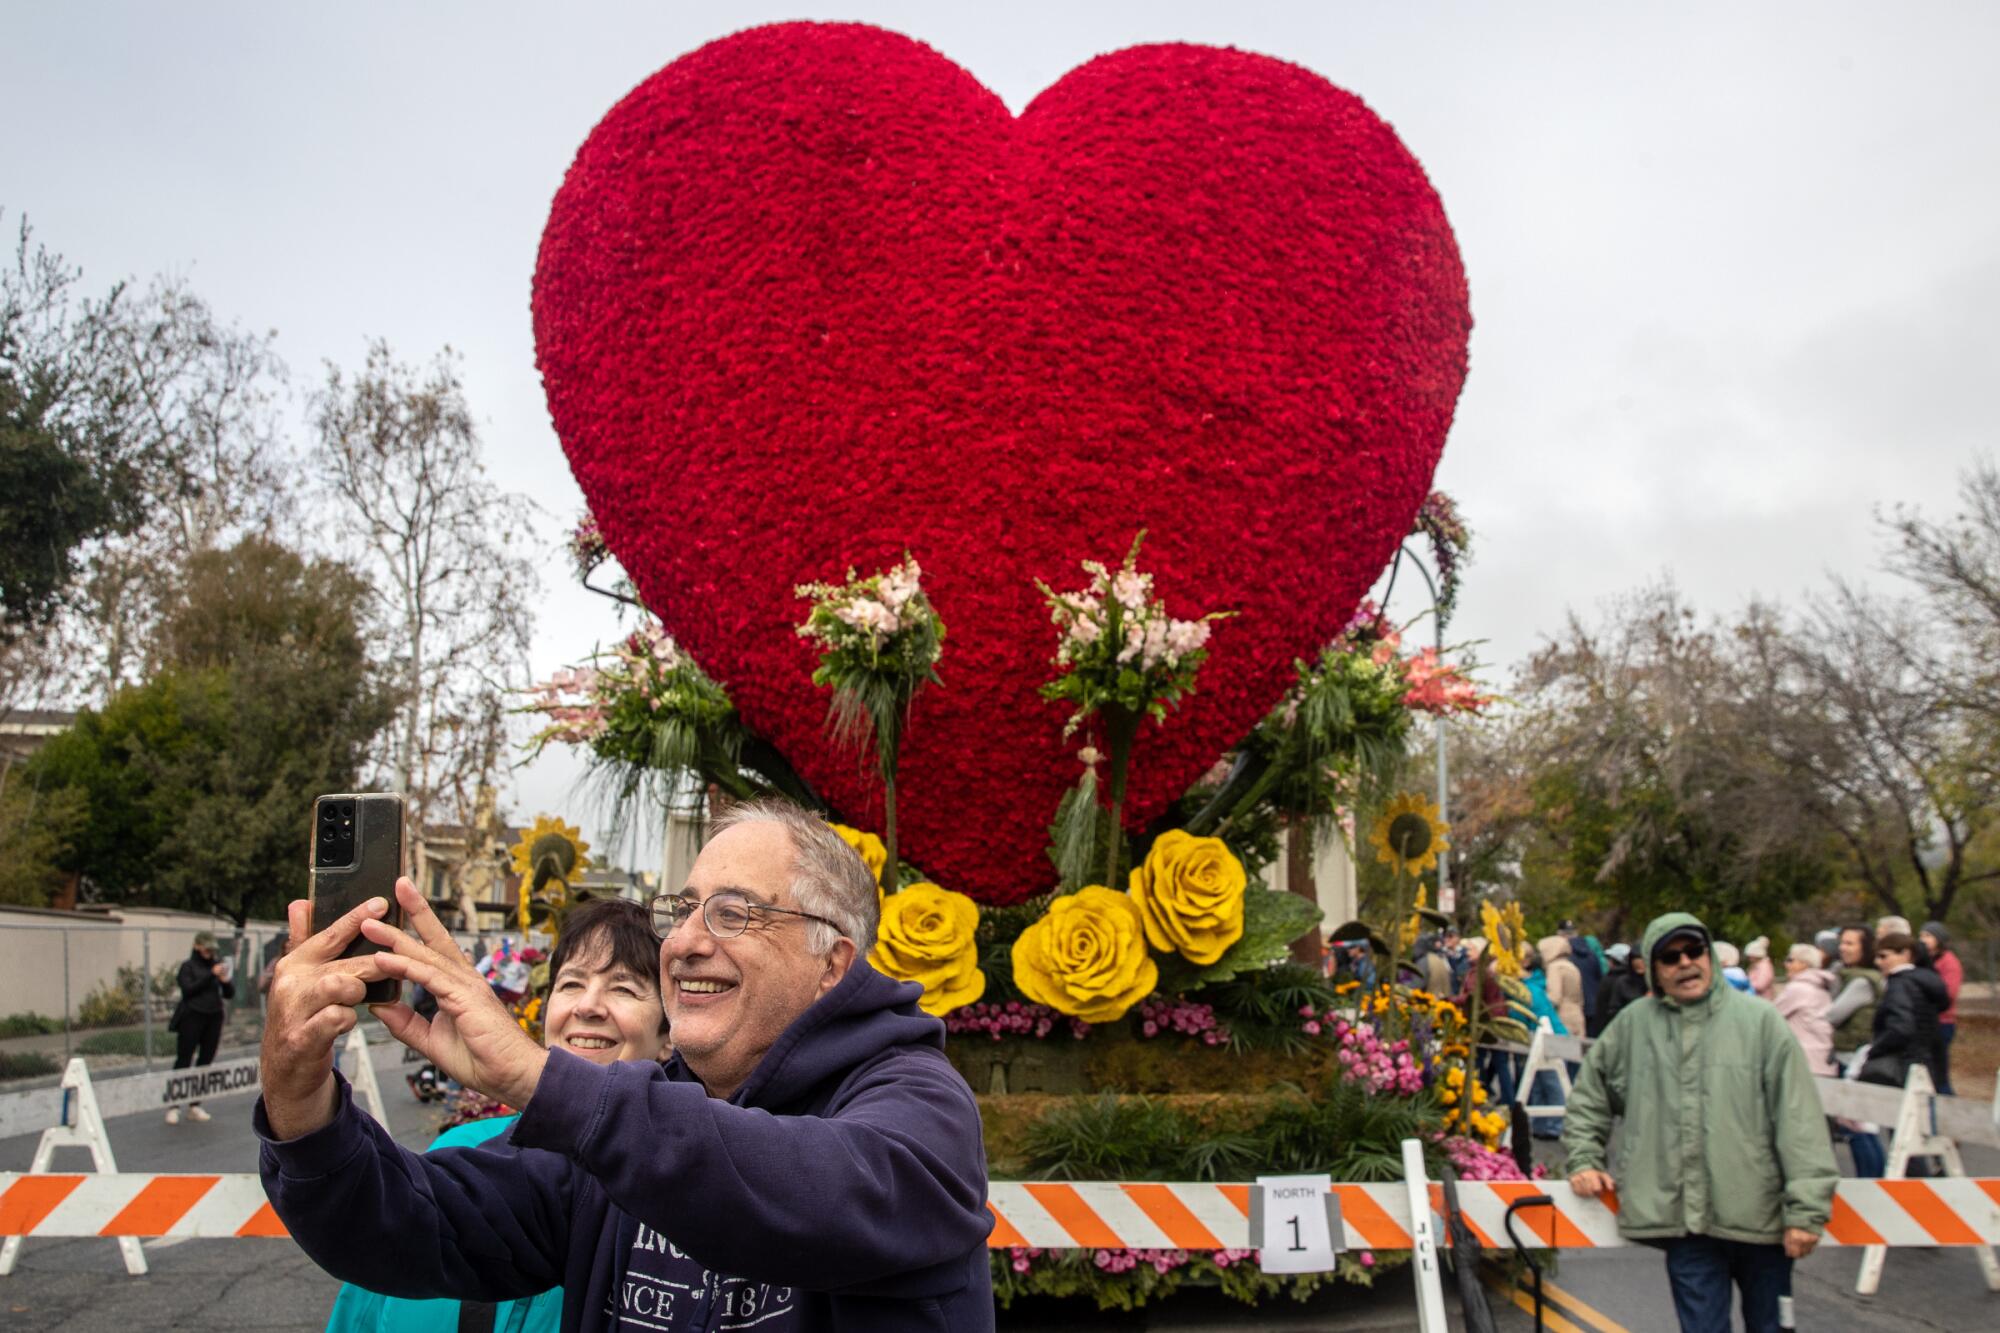 A man and a woman take a selfie in front of a heart-shaped float 